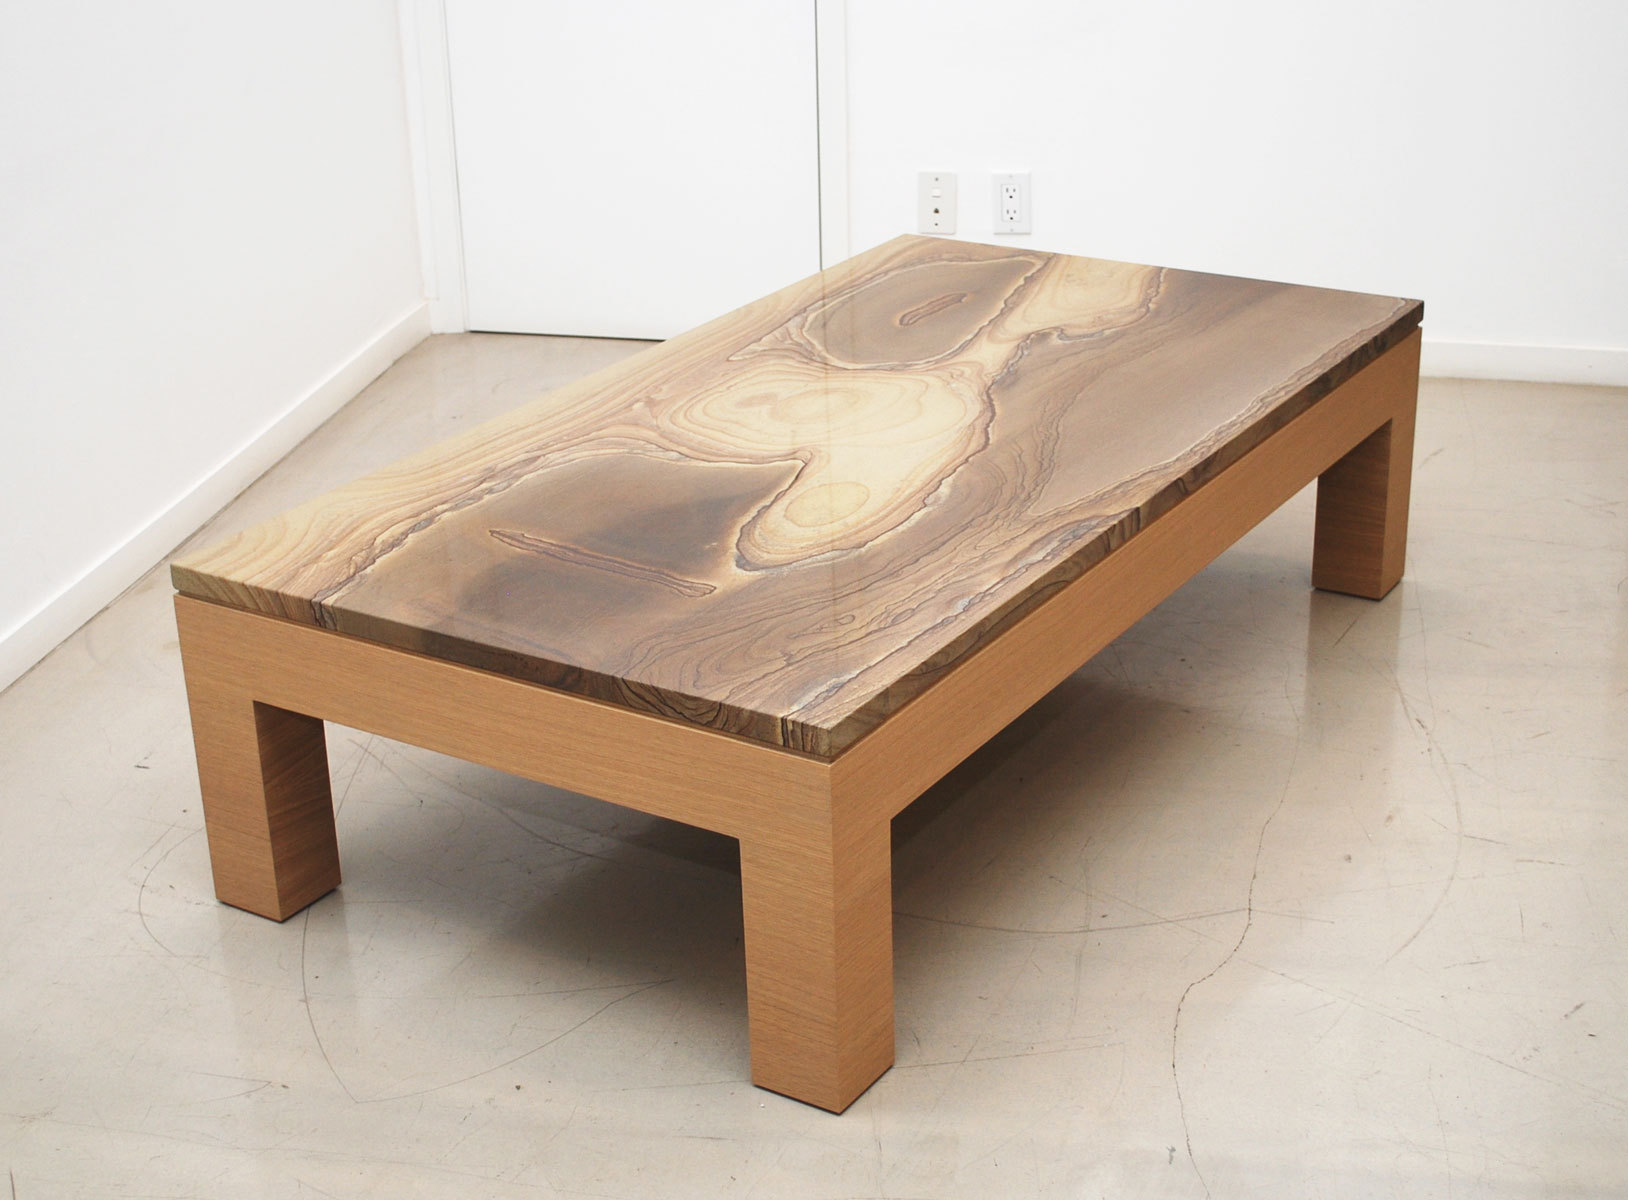 wooden coffee table design ideas photo - 10